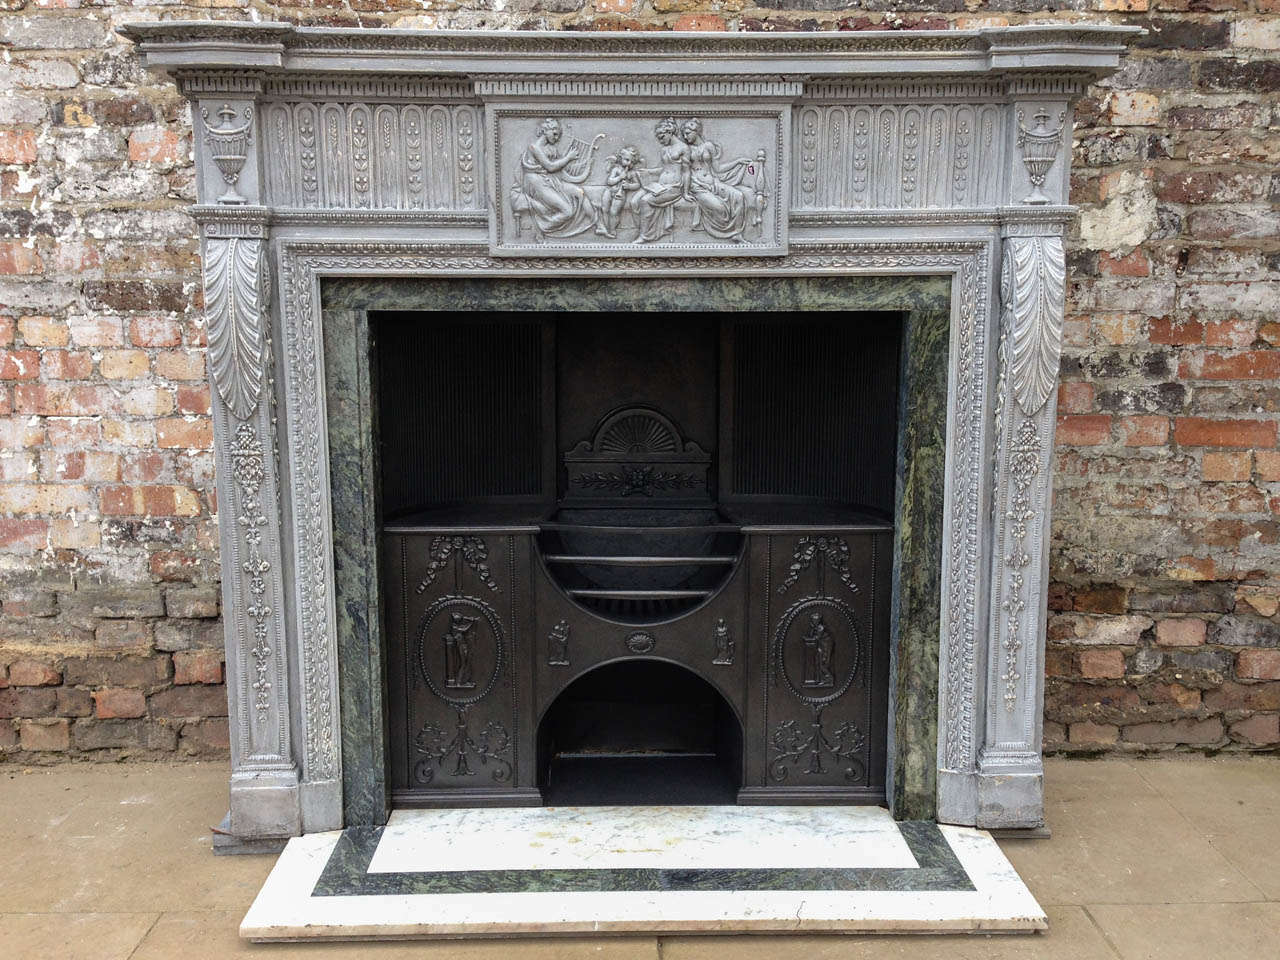 We are delighted to offer this spectacular carved pine and gesso Georgian chimney piece, in the Neoclassical manner of Robert Adam. The carvings and gesso castings are of the highest quality and typical of Robert Adam's late 18th century creations.